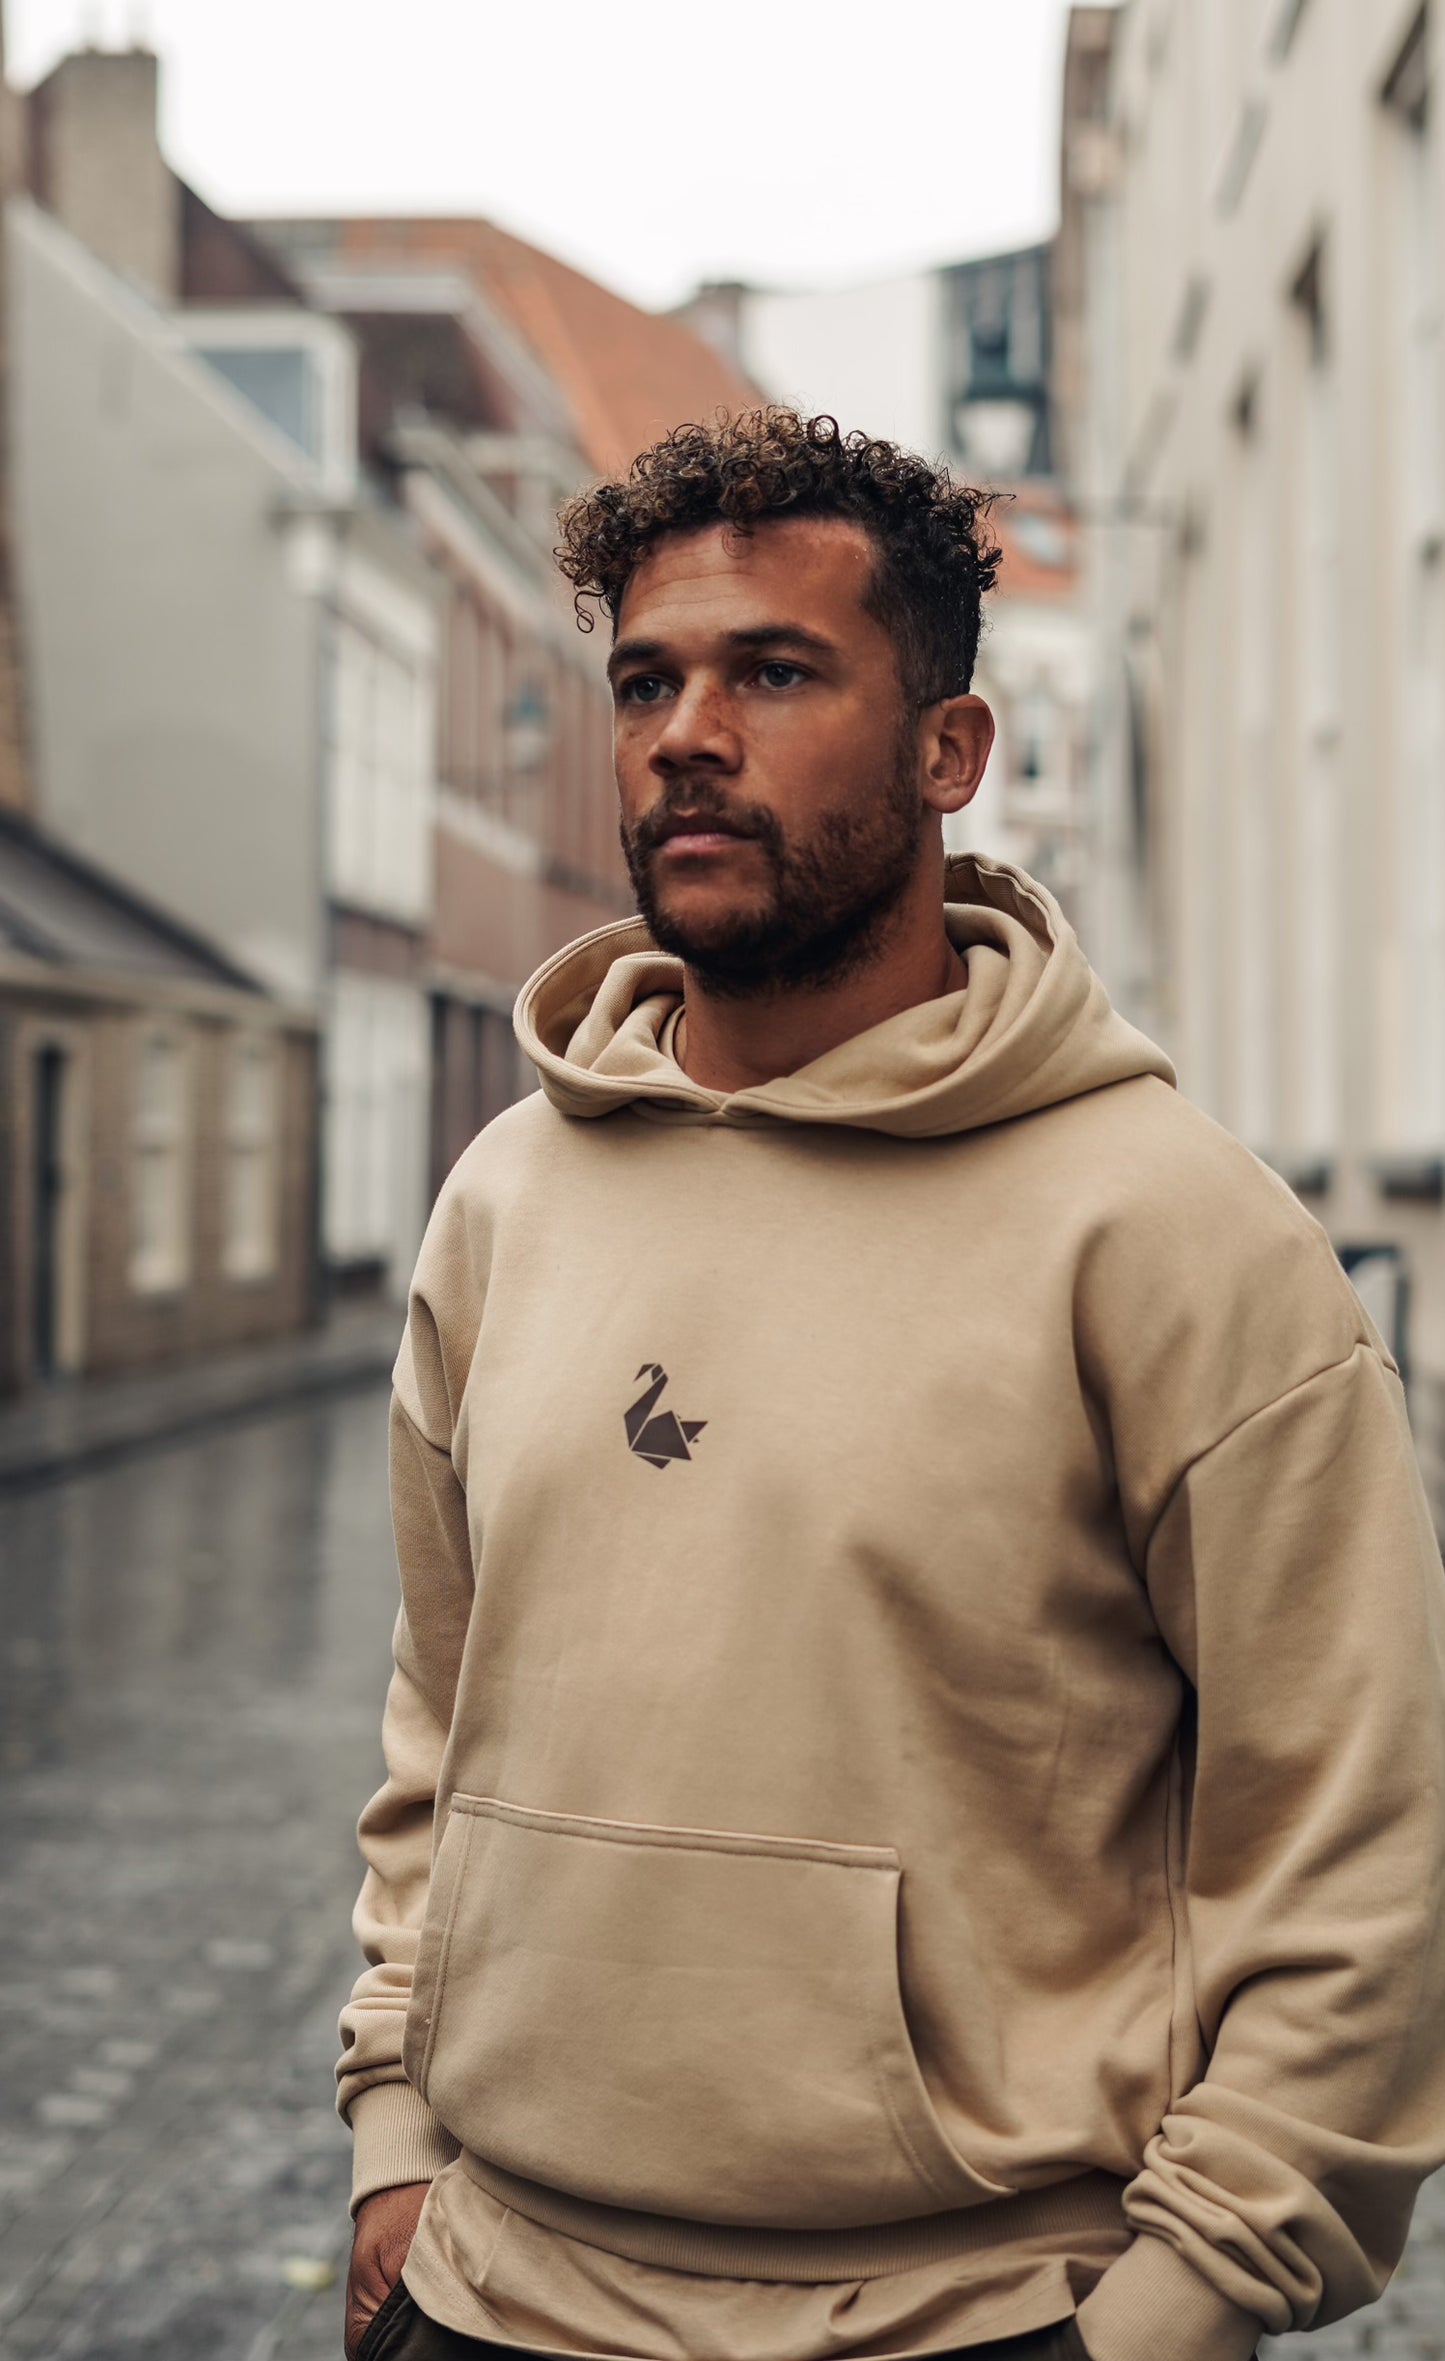 The Family Label Hoodie Unisex | Beige/Brown - Swanlife Fashion